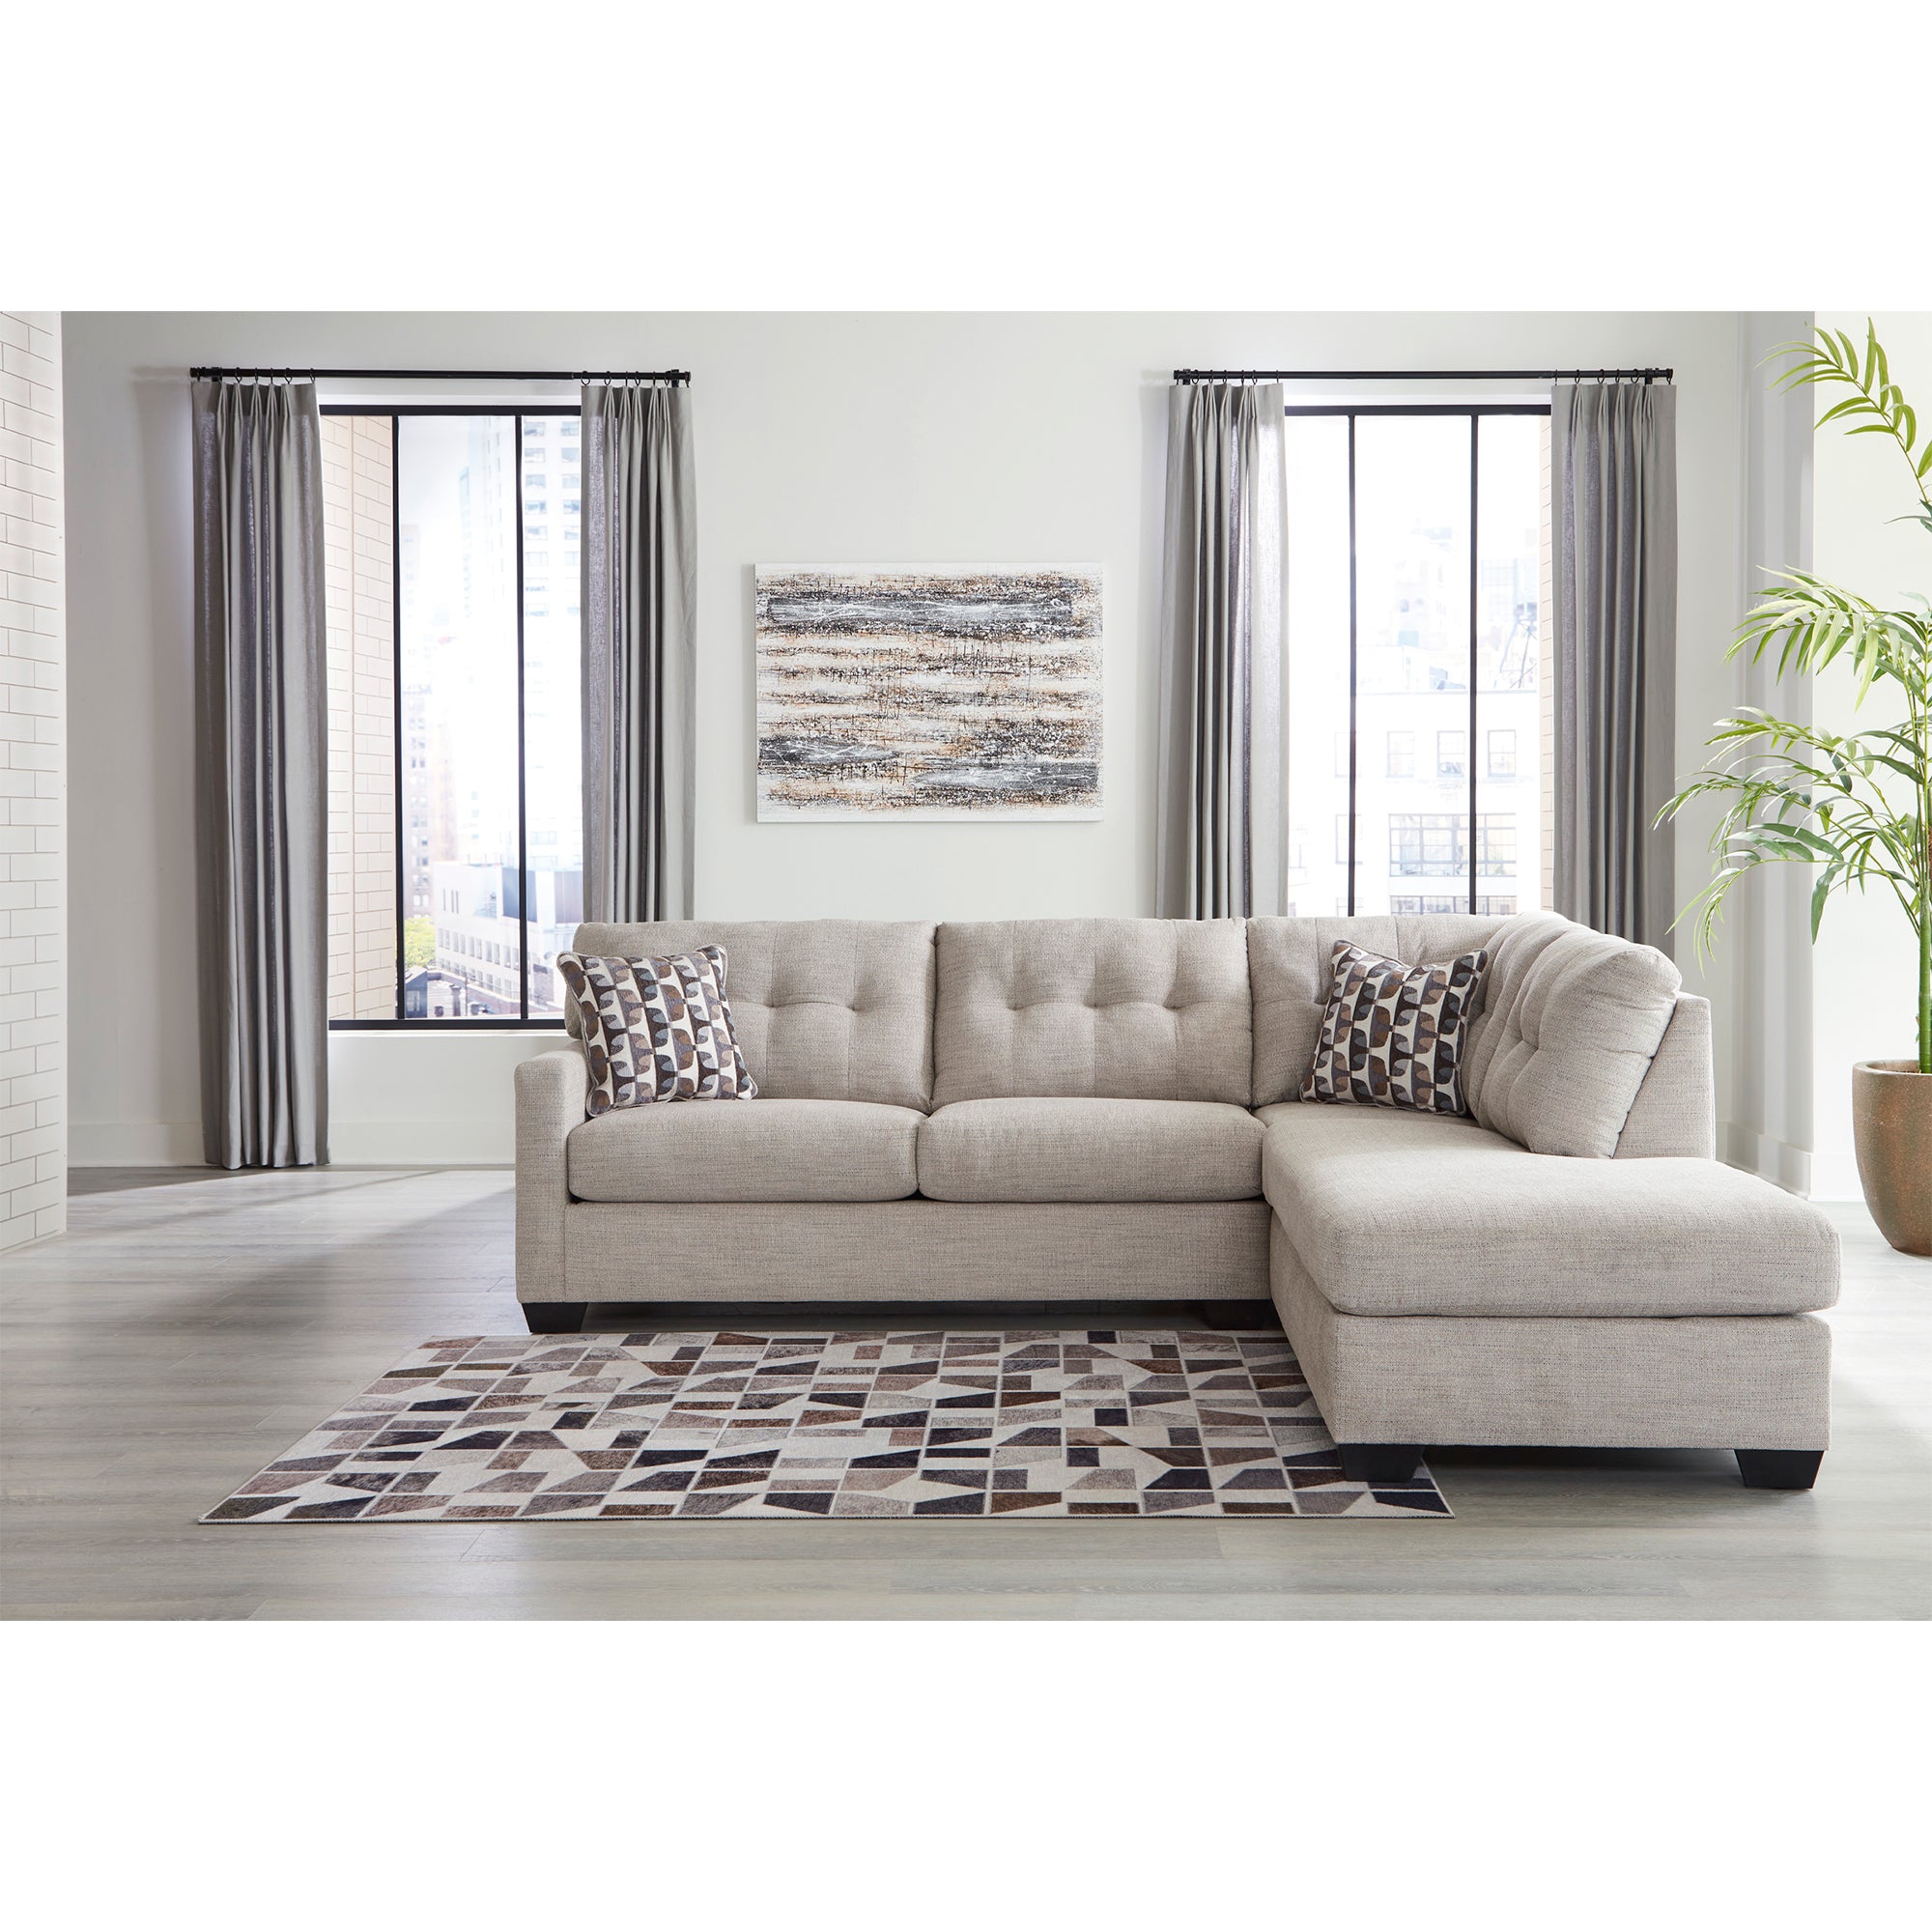 Pebble-colored Mahoney Sectional with plush chaise, a luxurious addition to Milwaukee living spaces